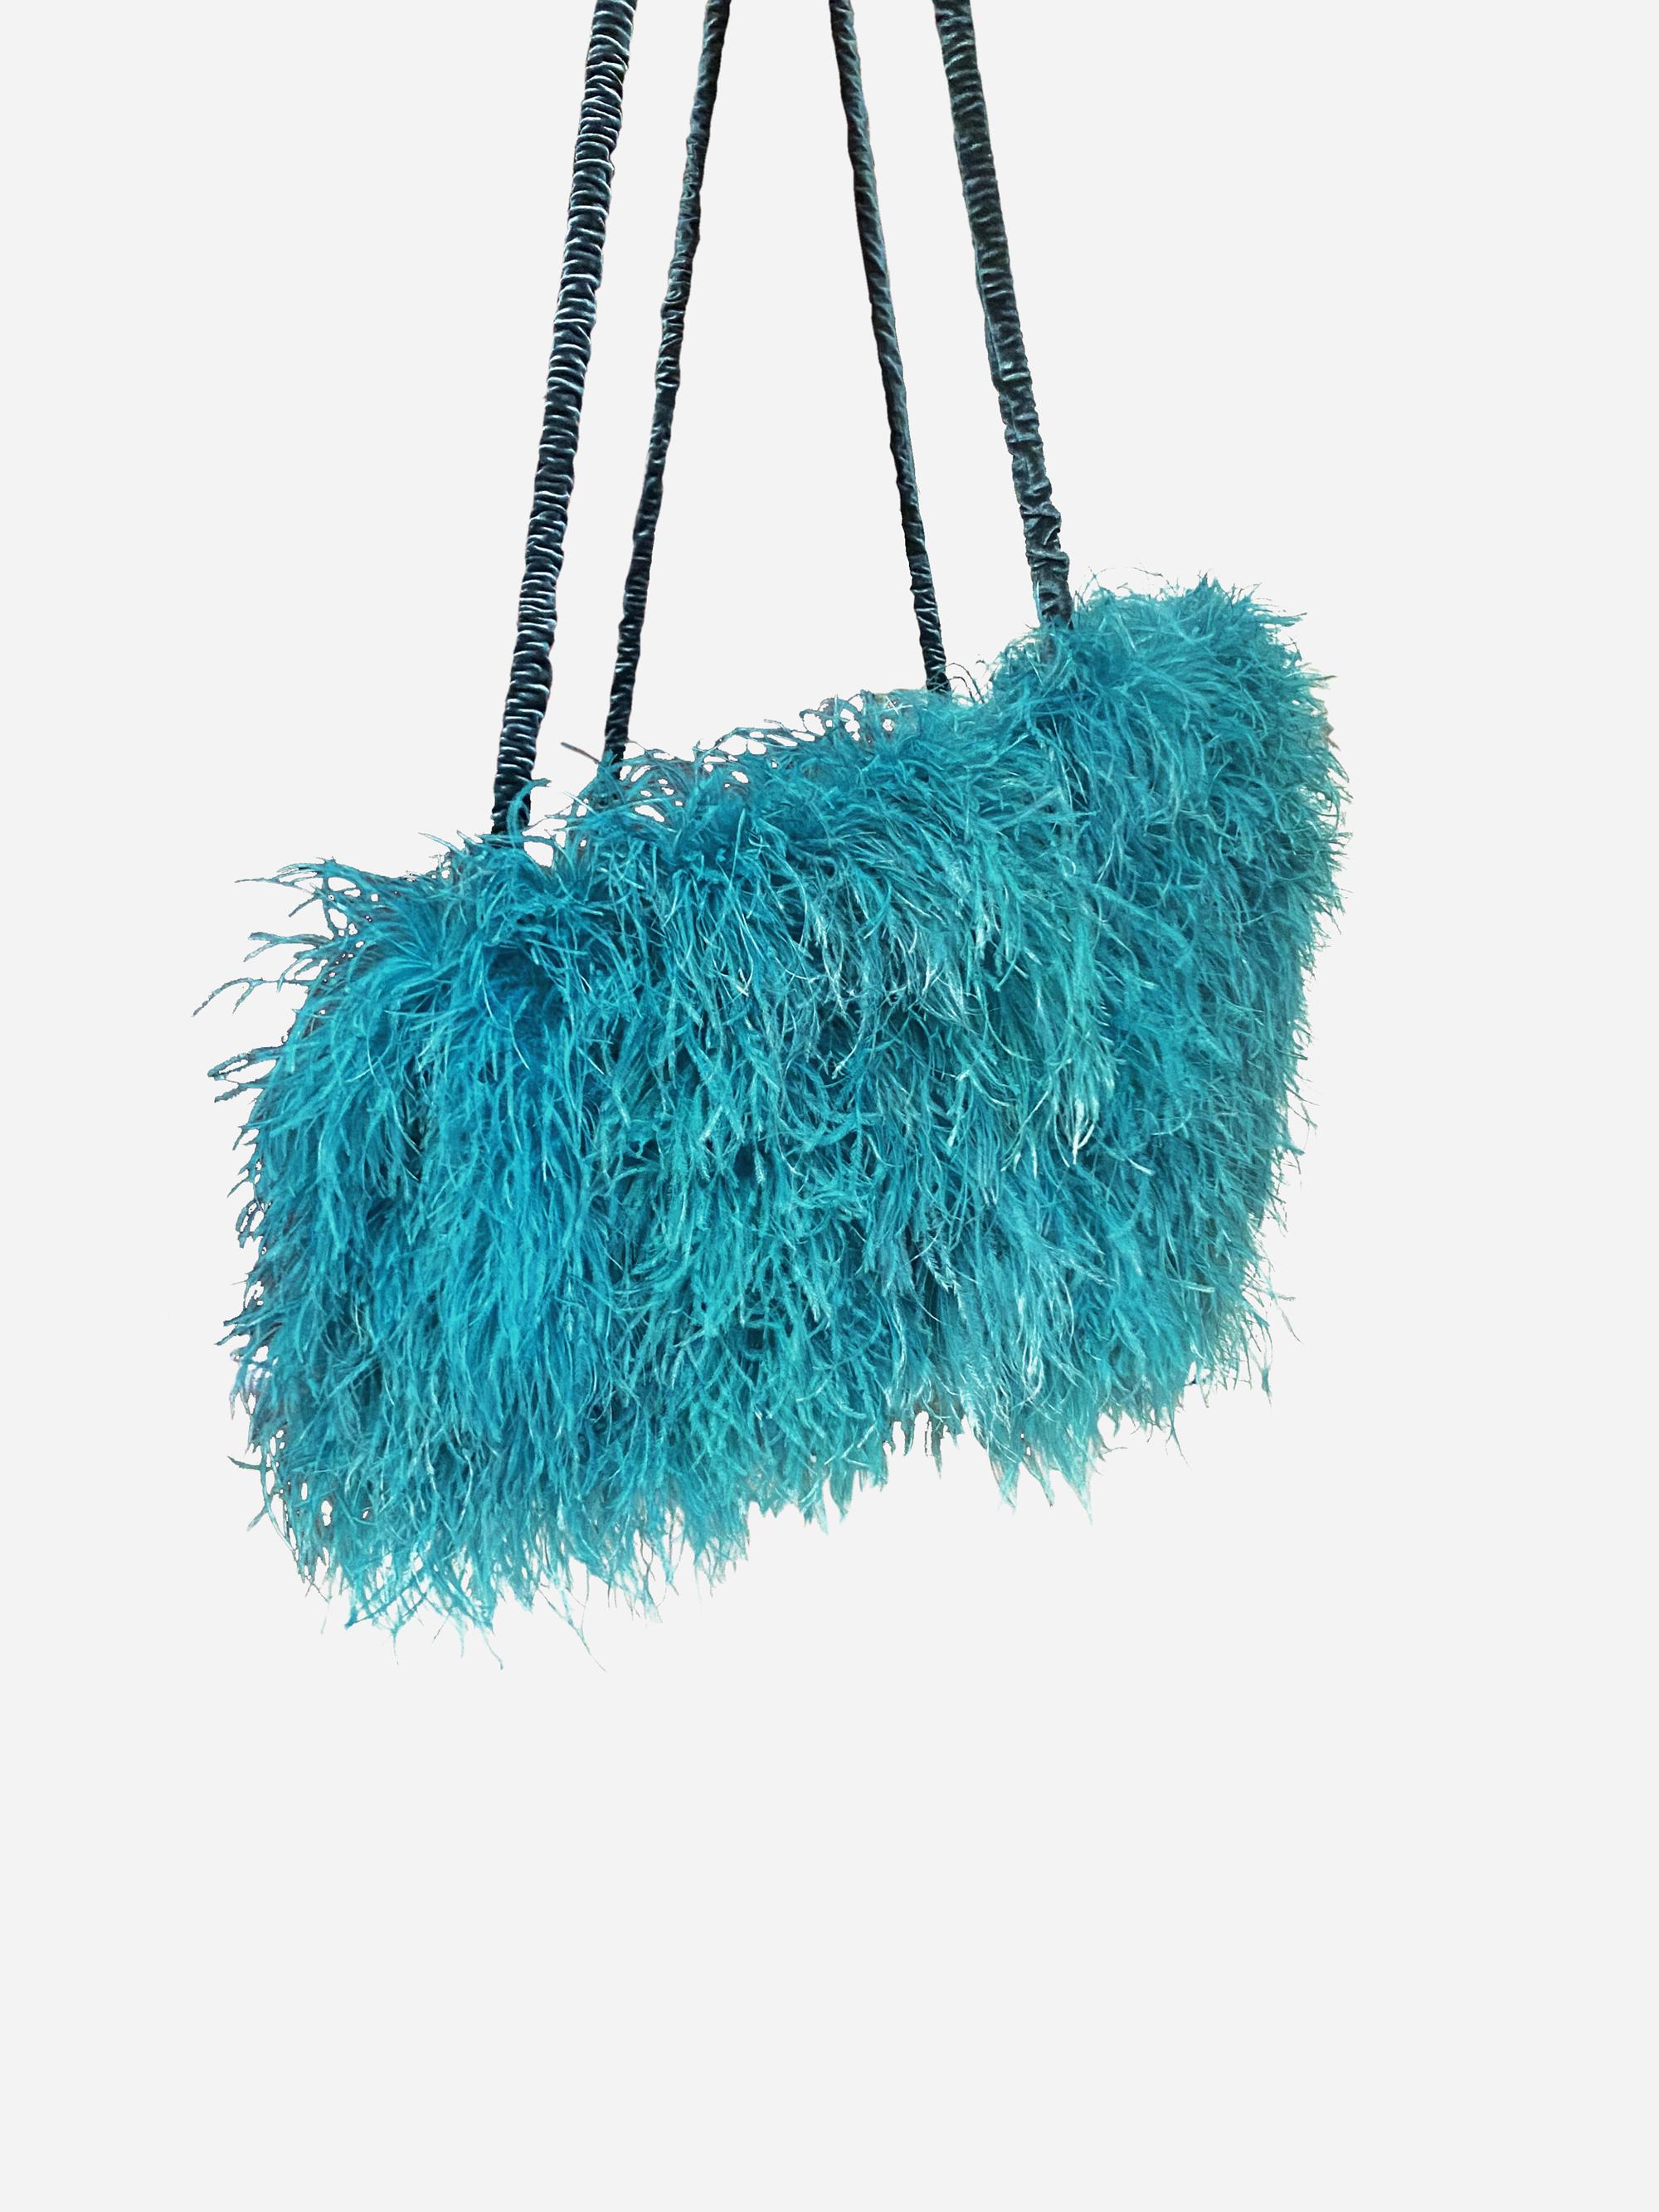 Aqva Swing Armchair, a Prized Upholstery in Turquoise Ostrich Feathers ...